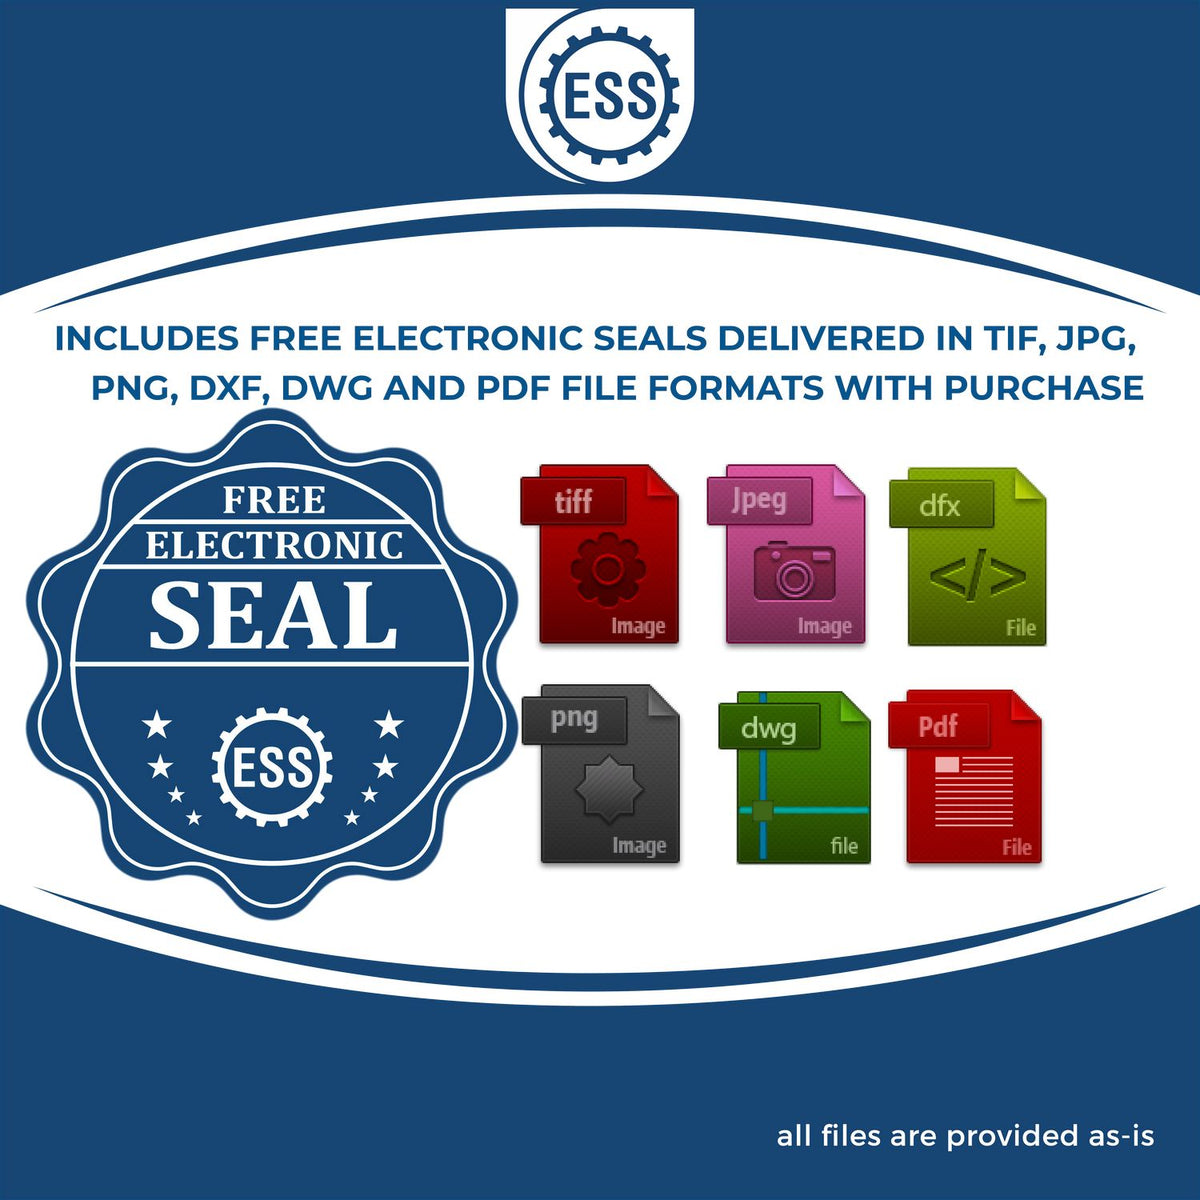 An infographic for the free electronic seal for the Premium MaxLight Pre-Inked Ohio Landscape Architectural Stamp illustrating the different file type icons such as DXF, DWG, TIF, JPG and PNG.